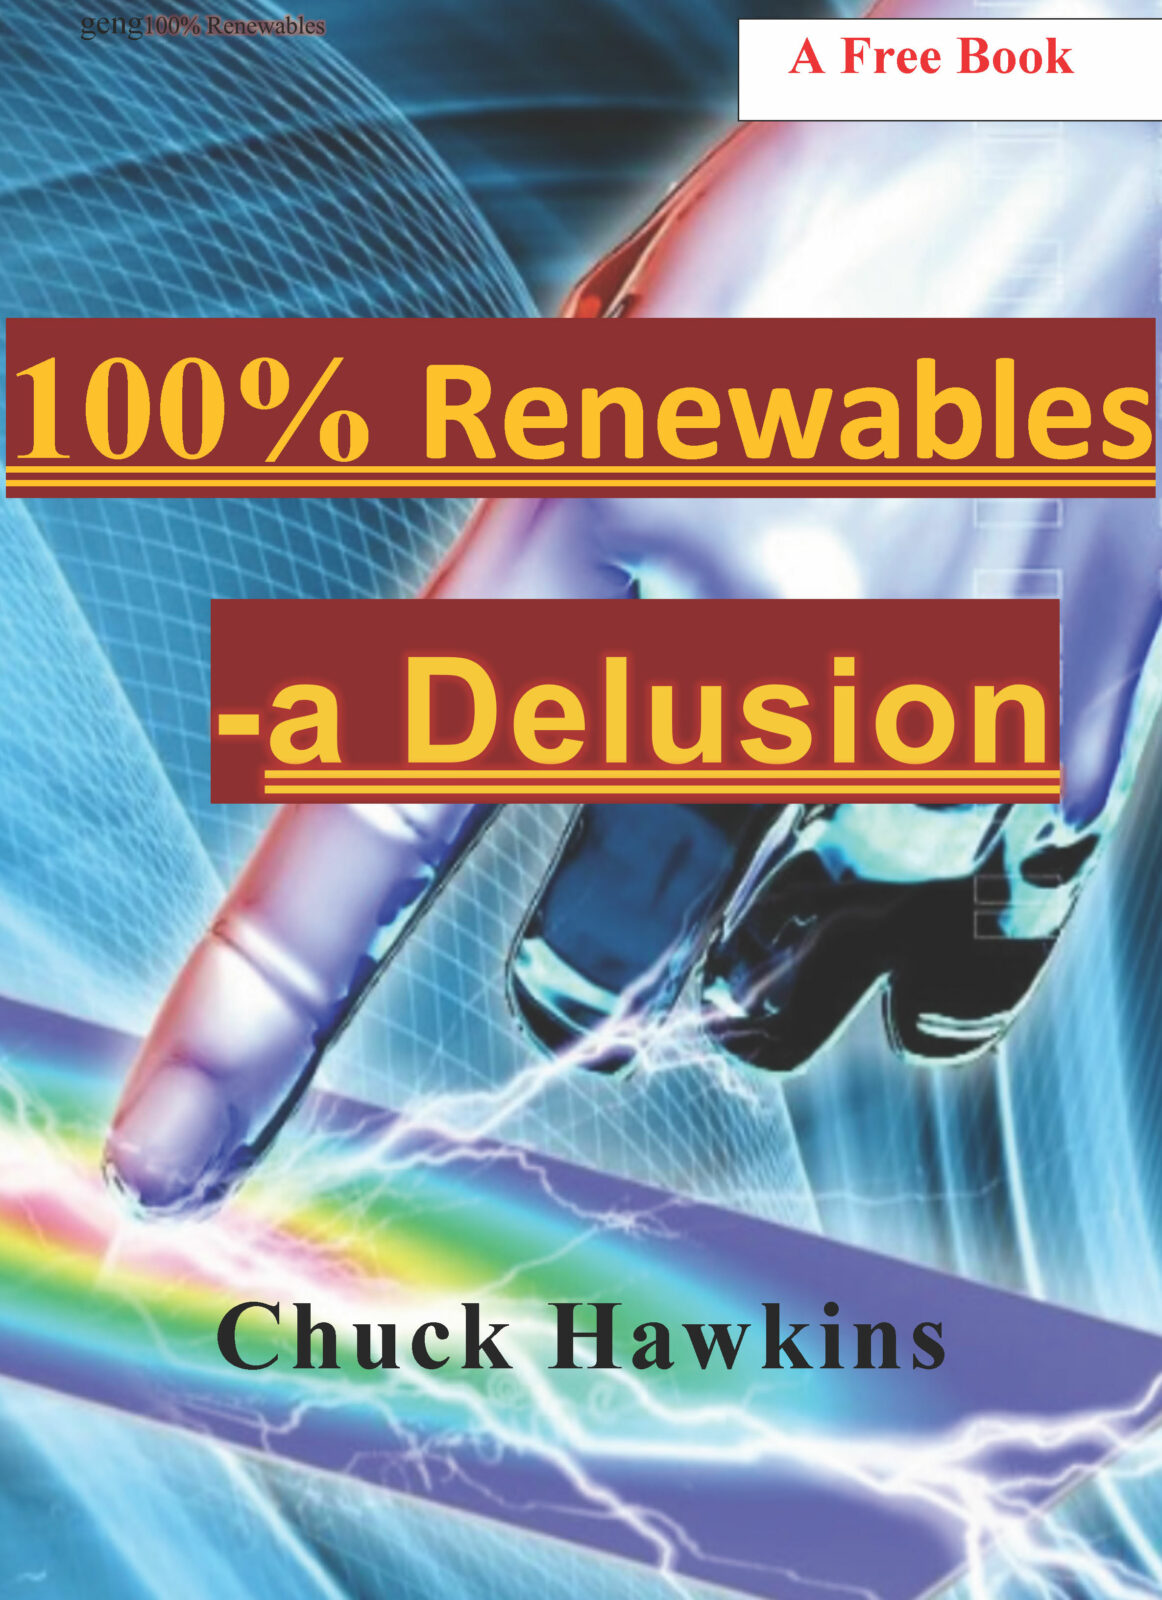 “100% Renewables – A Delusion” by Chuck Hawkins